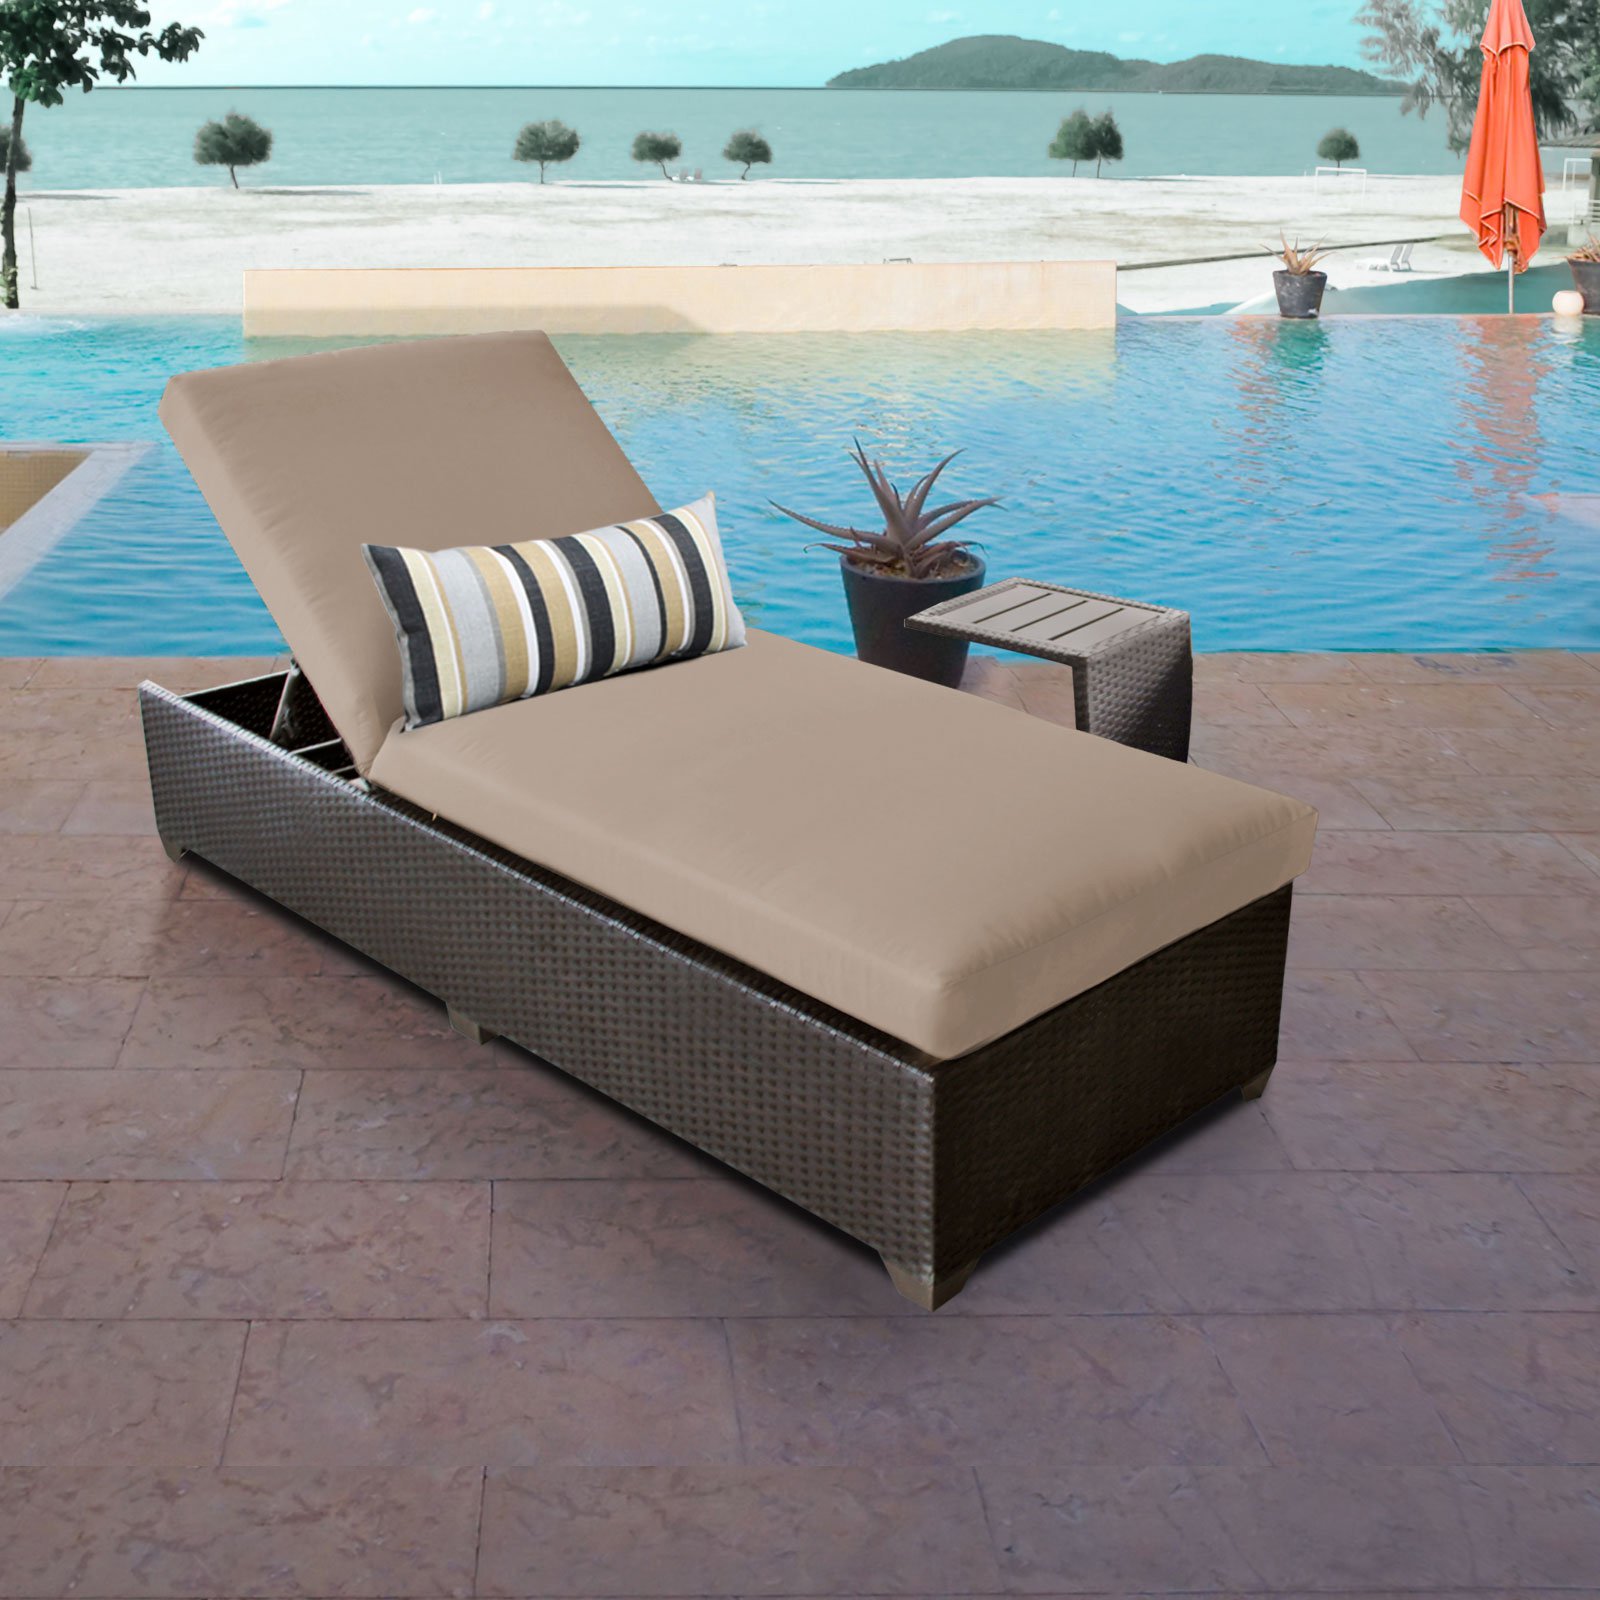 Barbados Chaise Set of 2 Outdoor Wicker Patio Furniture - image 5 of 10